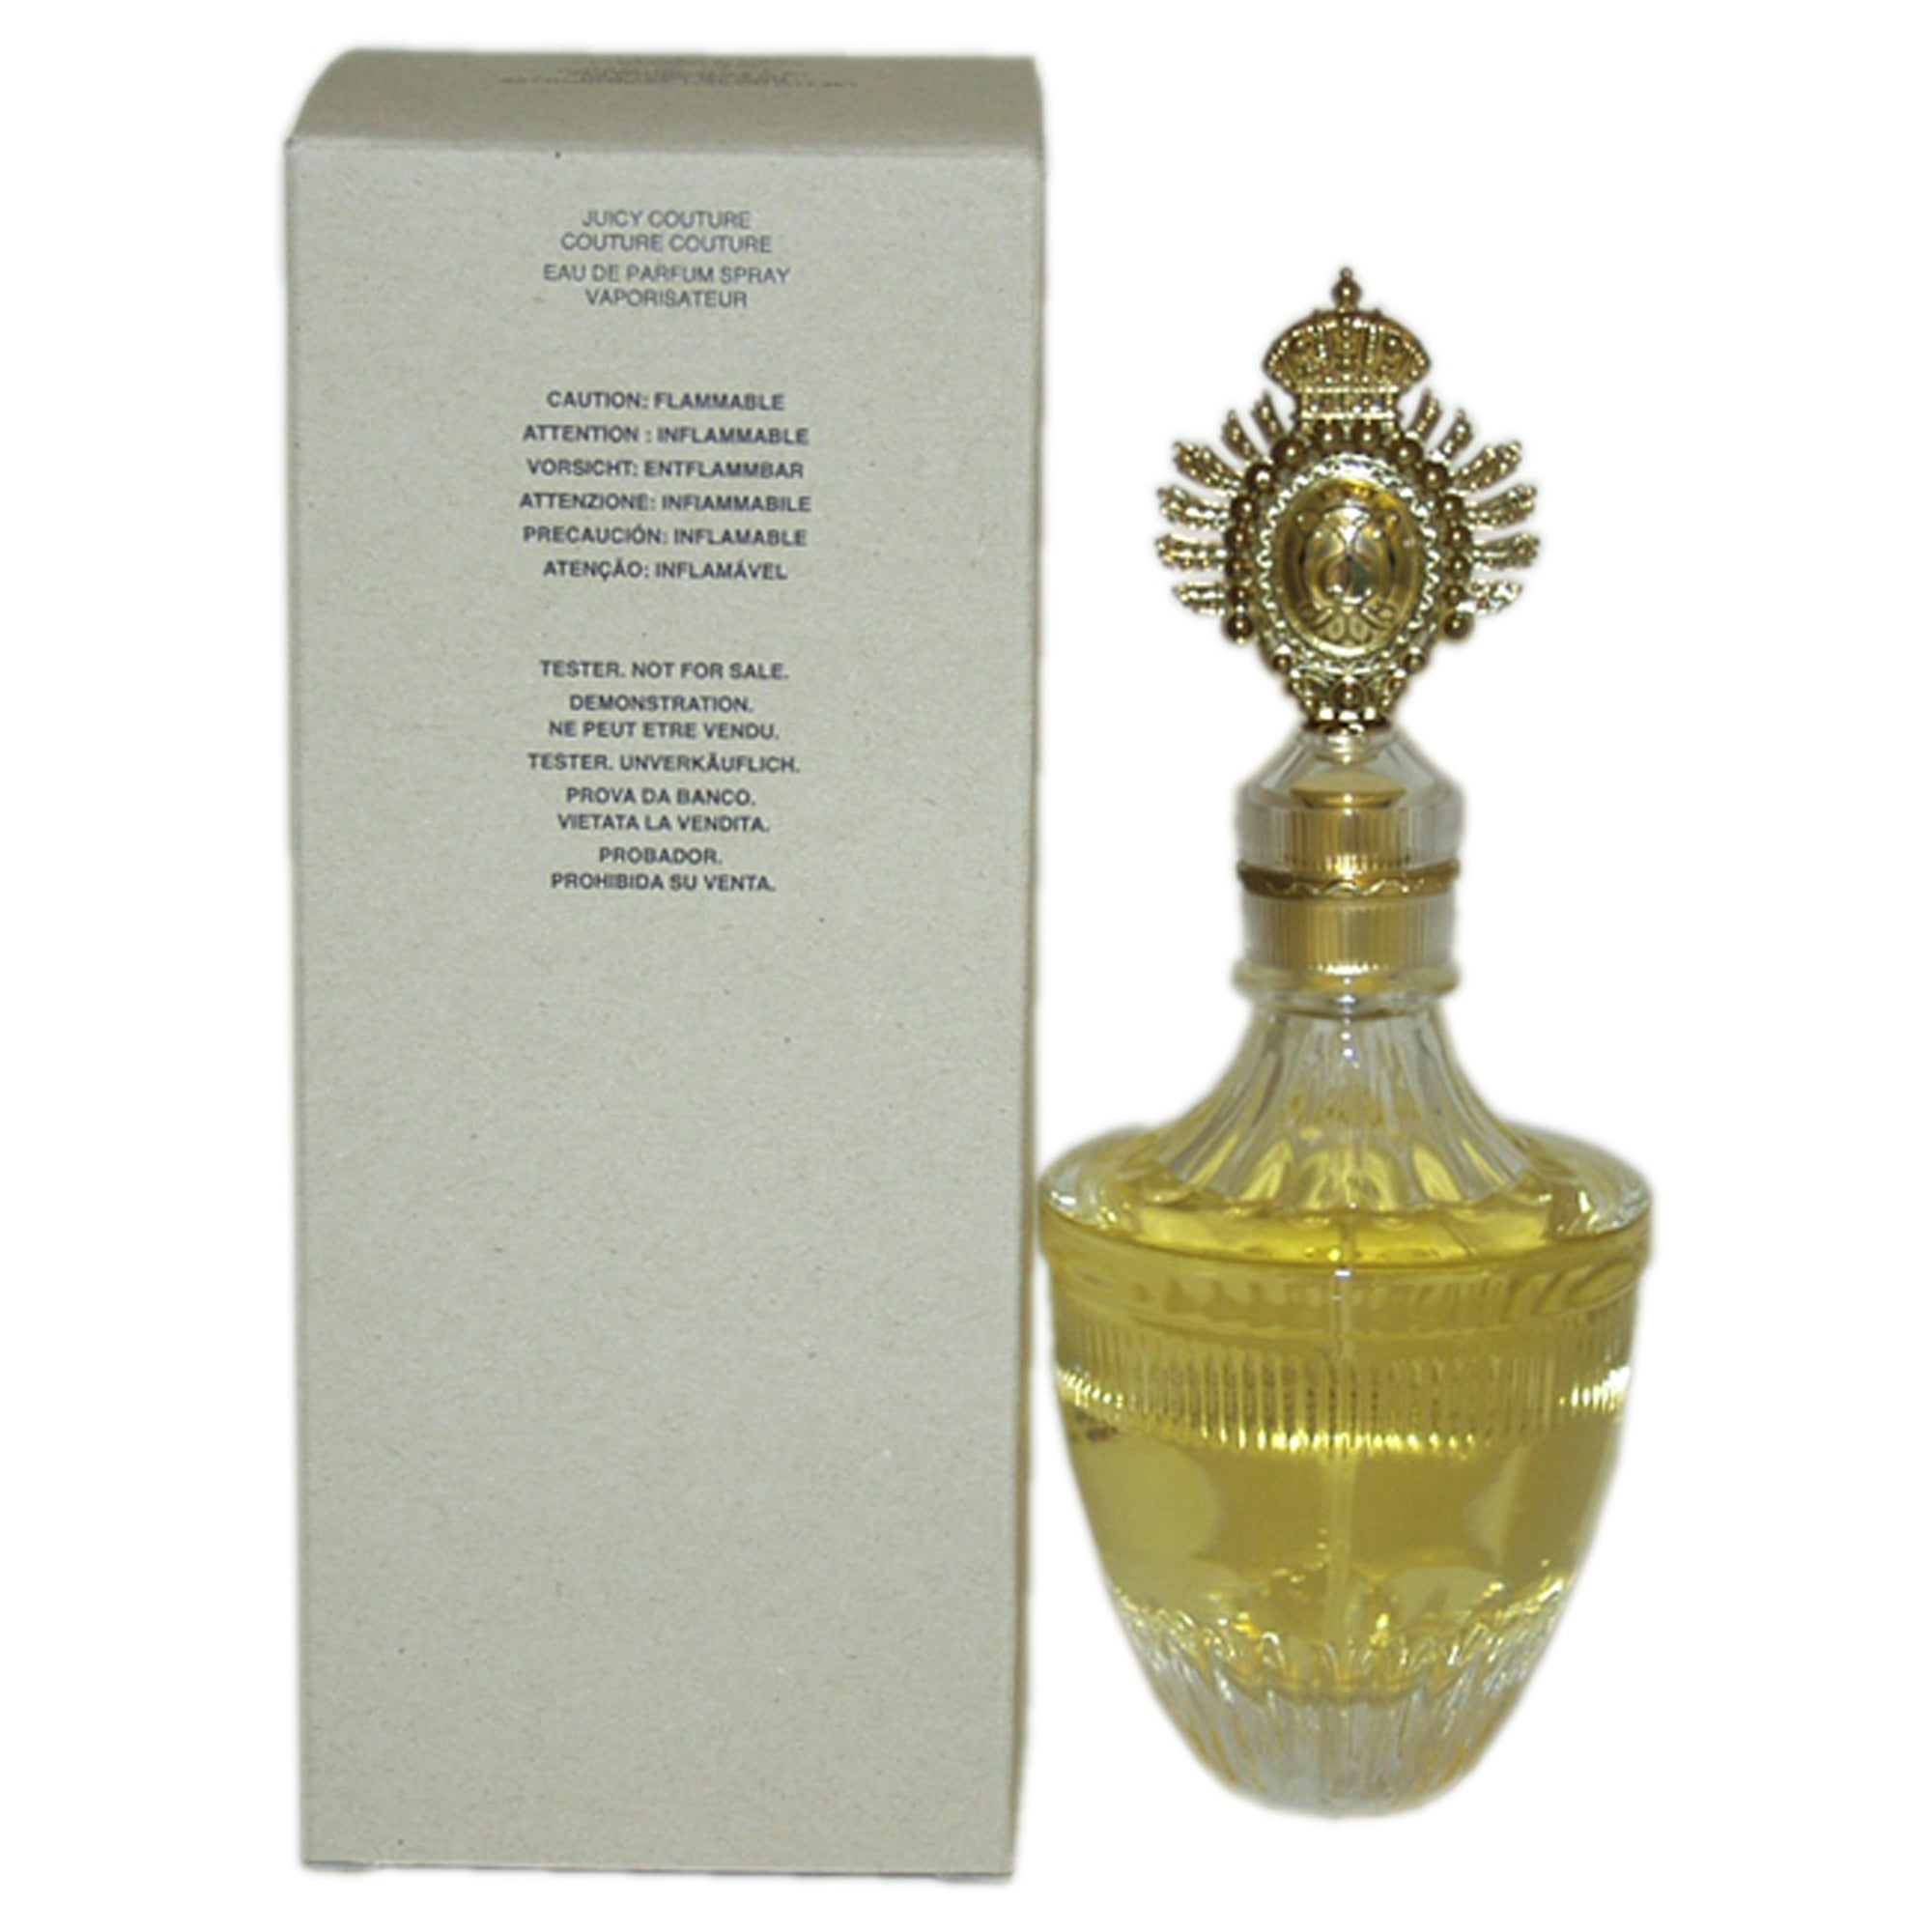 Couture Couture by Juicy Couture for Women - 3.4 oz EDP Spray (Tester)